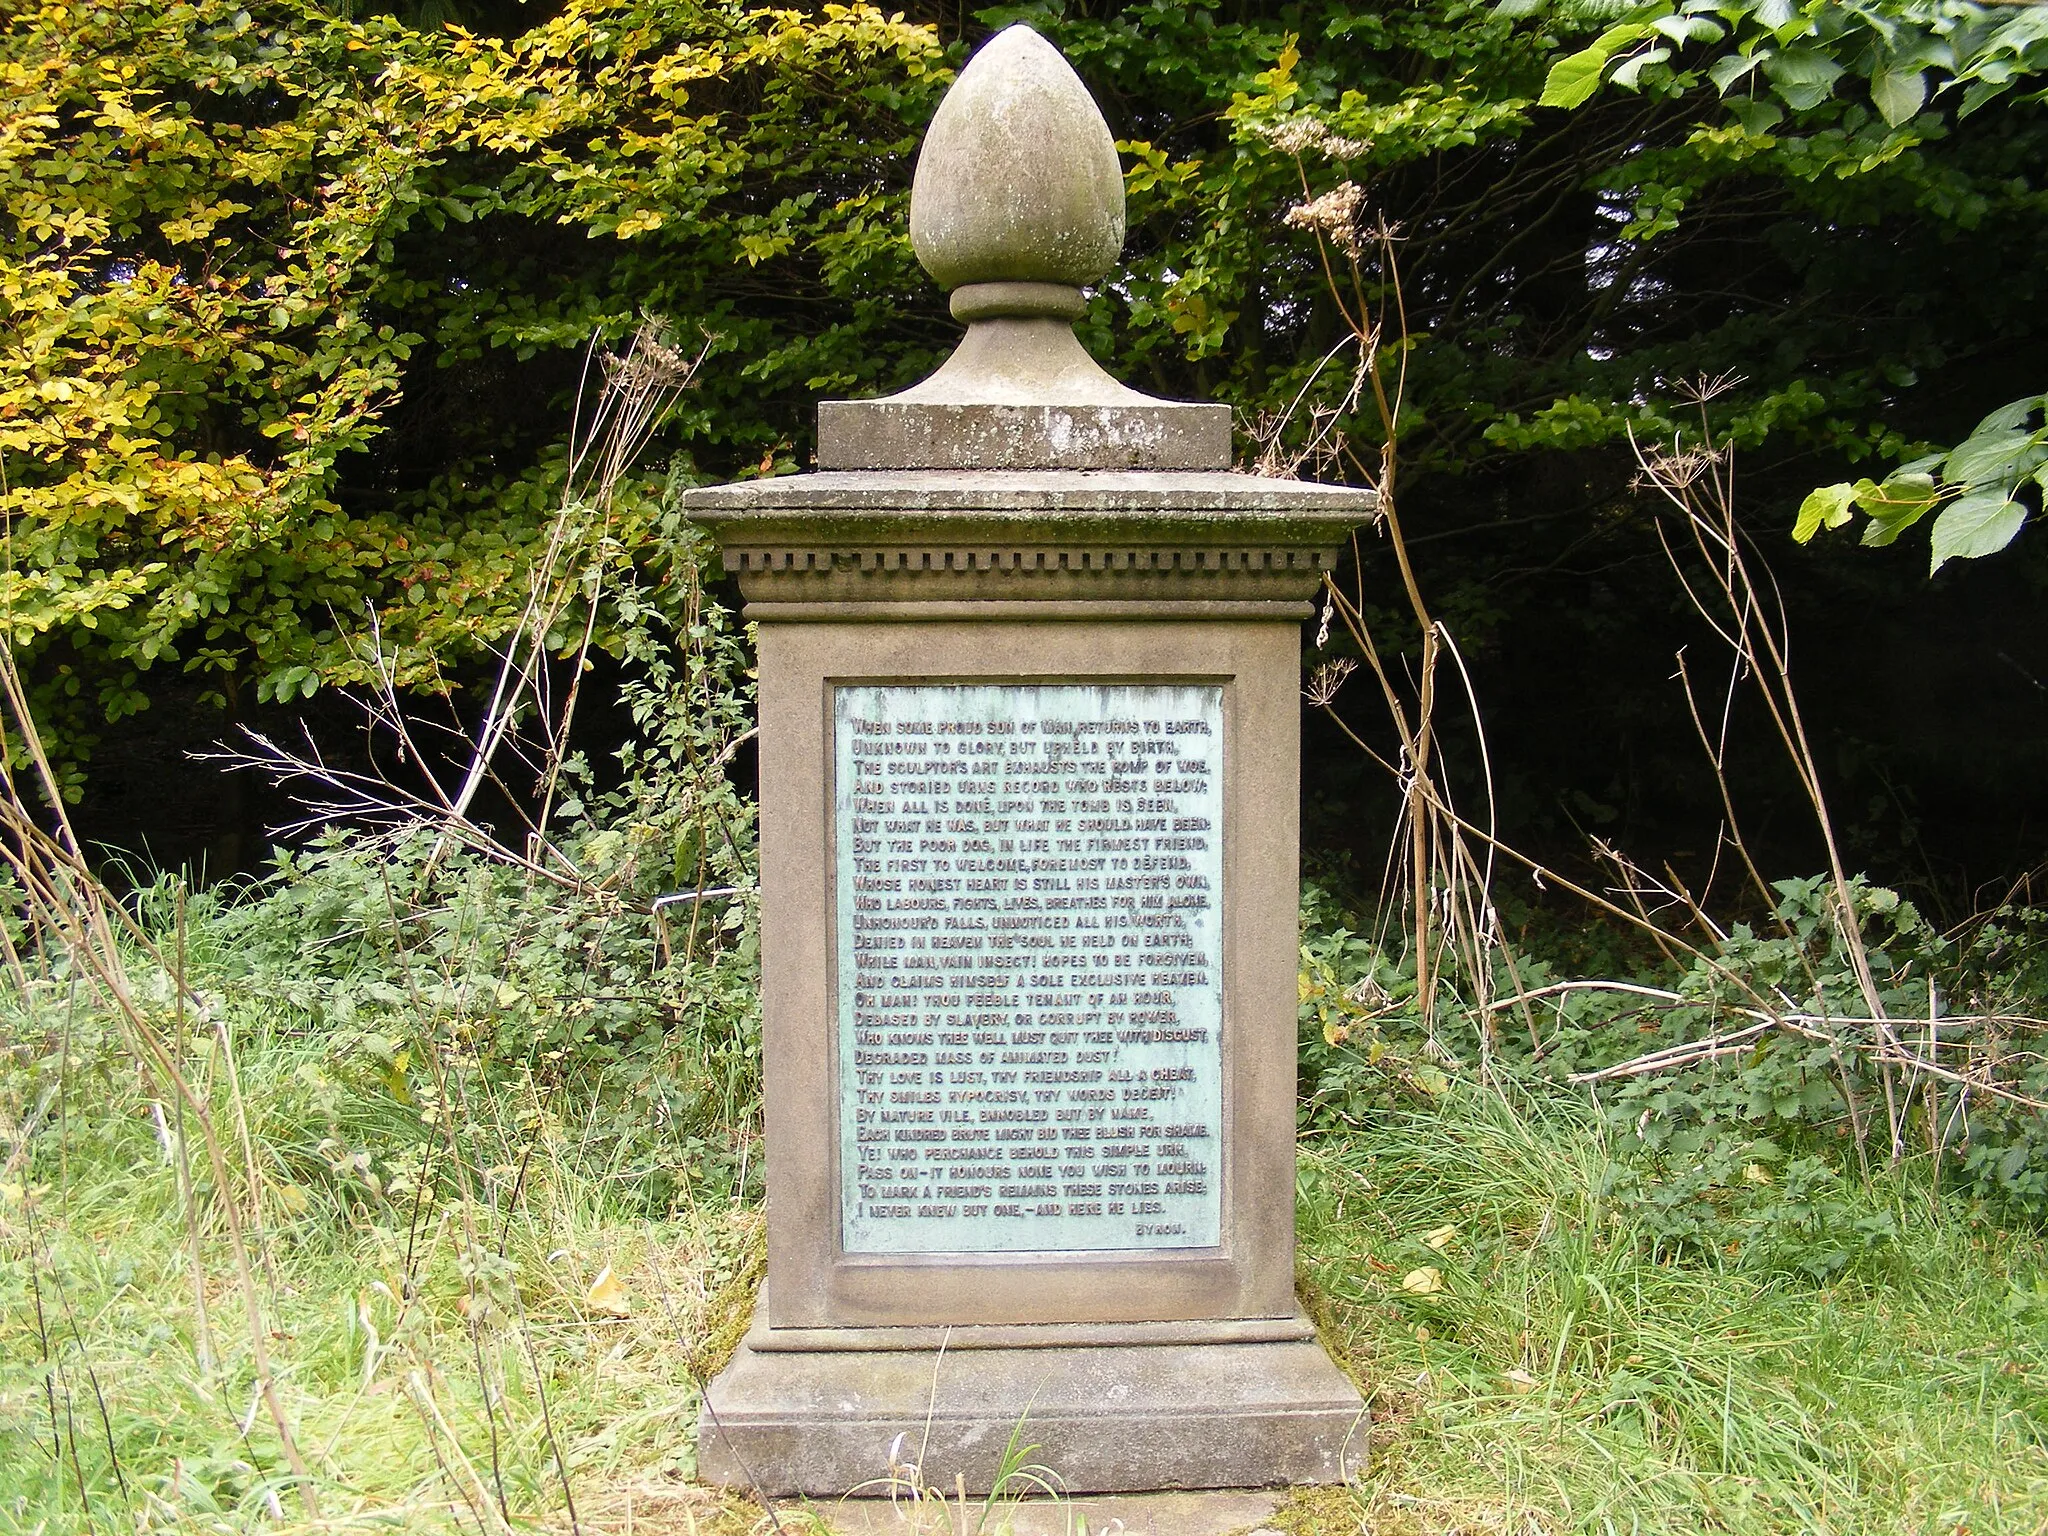 Photo showing: Monument erected in memorial to the Sykes family's pets.  Located in the grounds of Sledmere House, Sledmere, East Riding of Yorkshire, England.